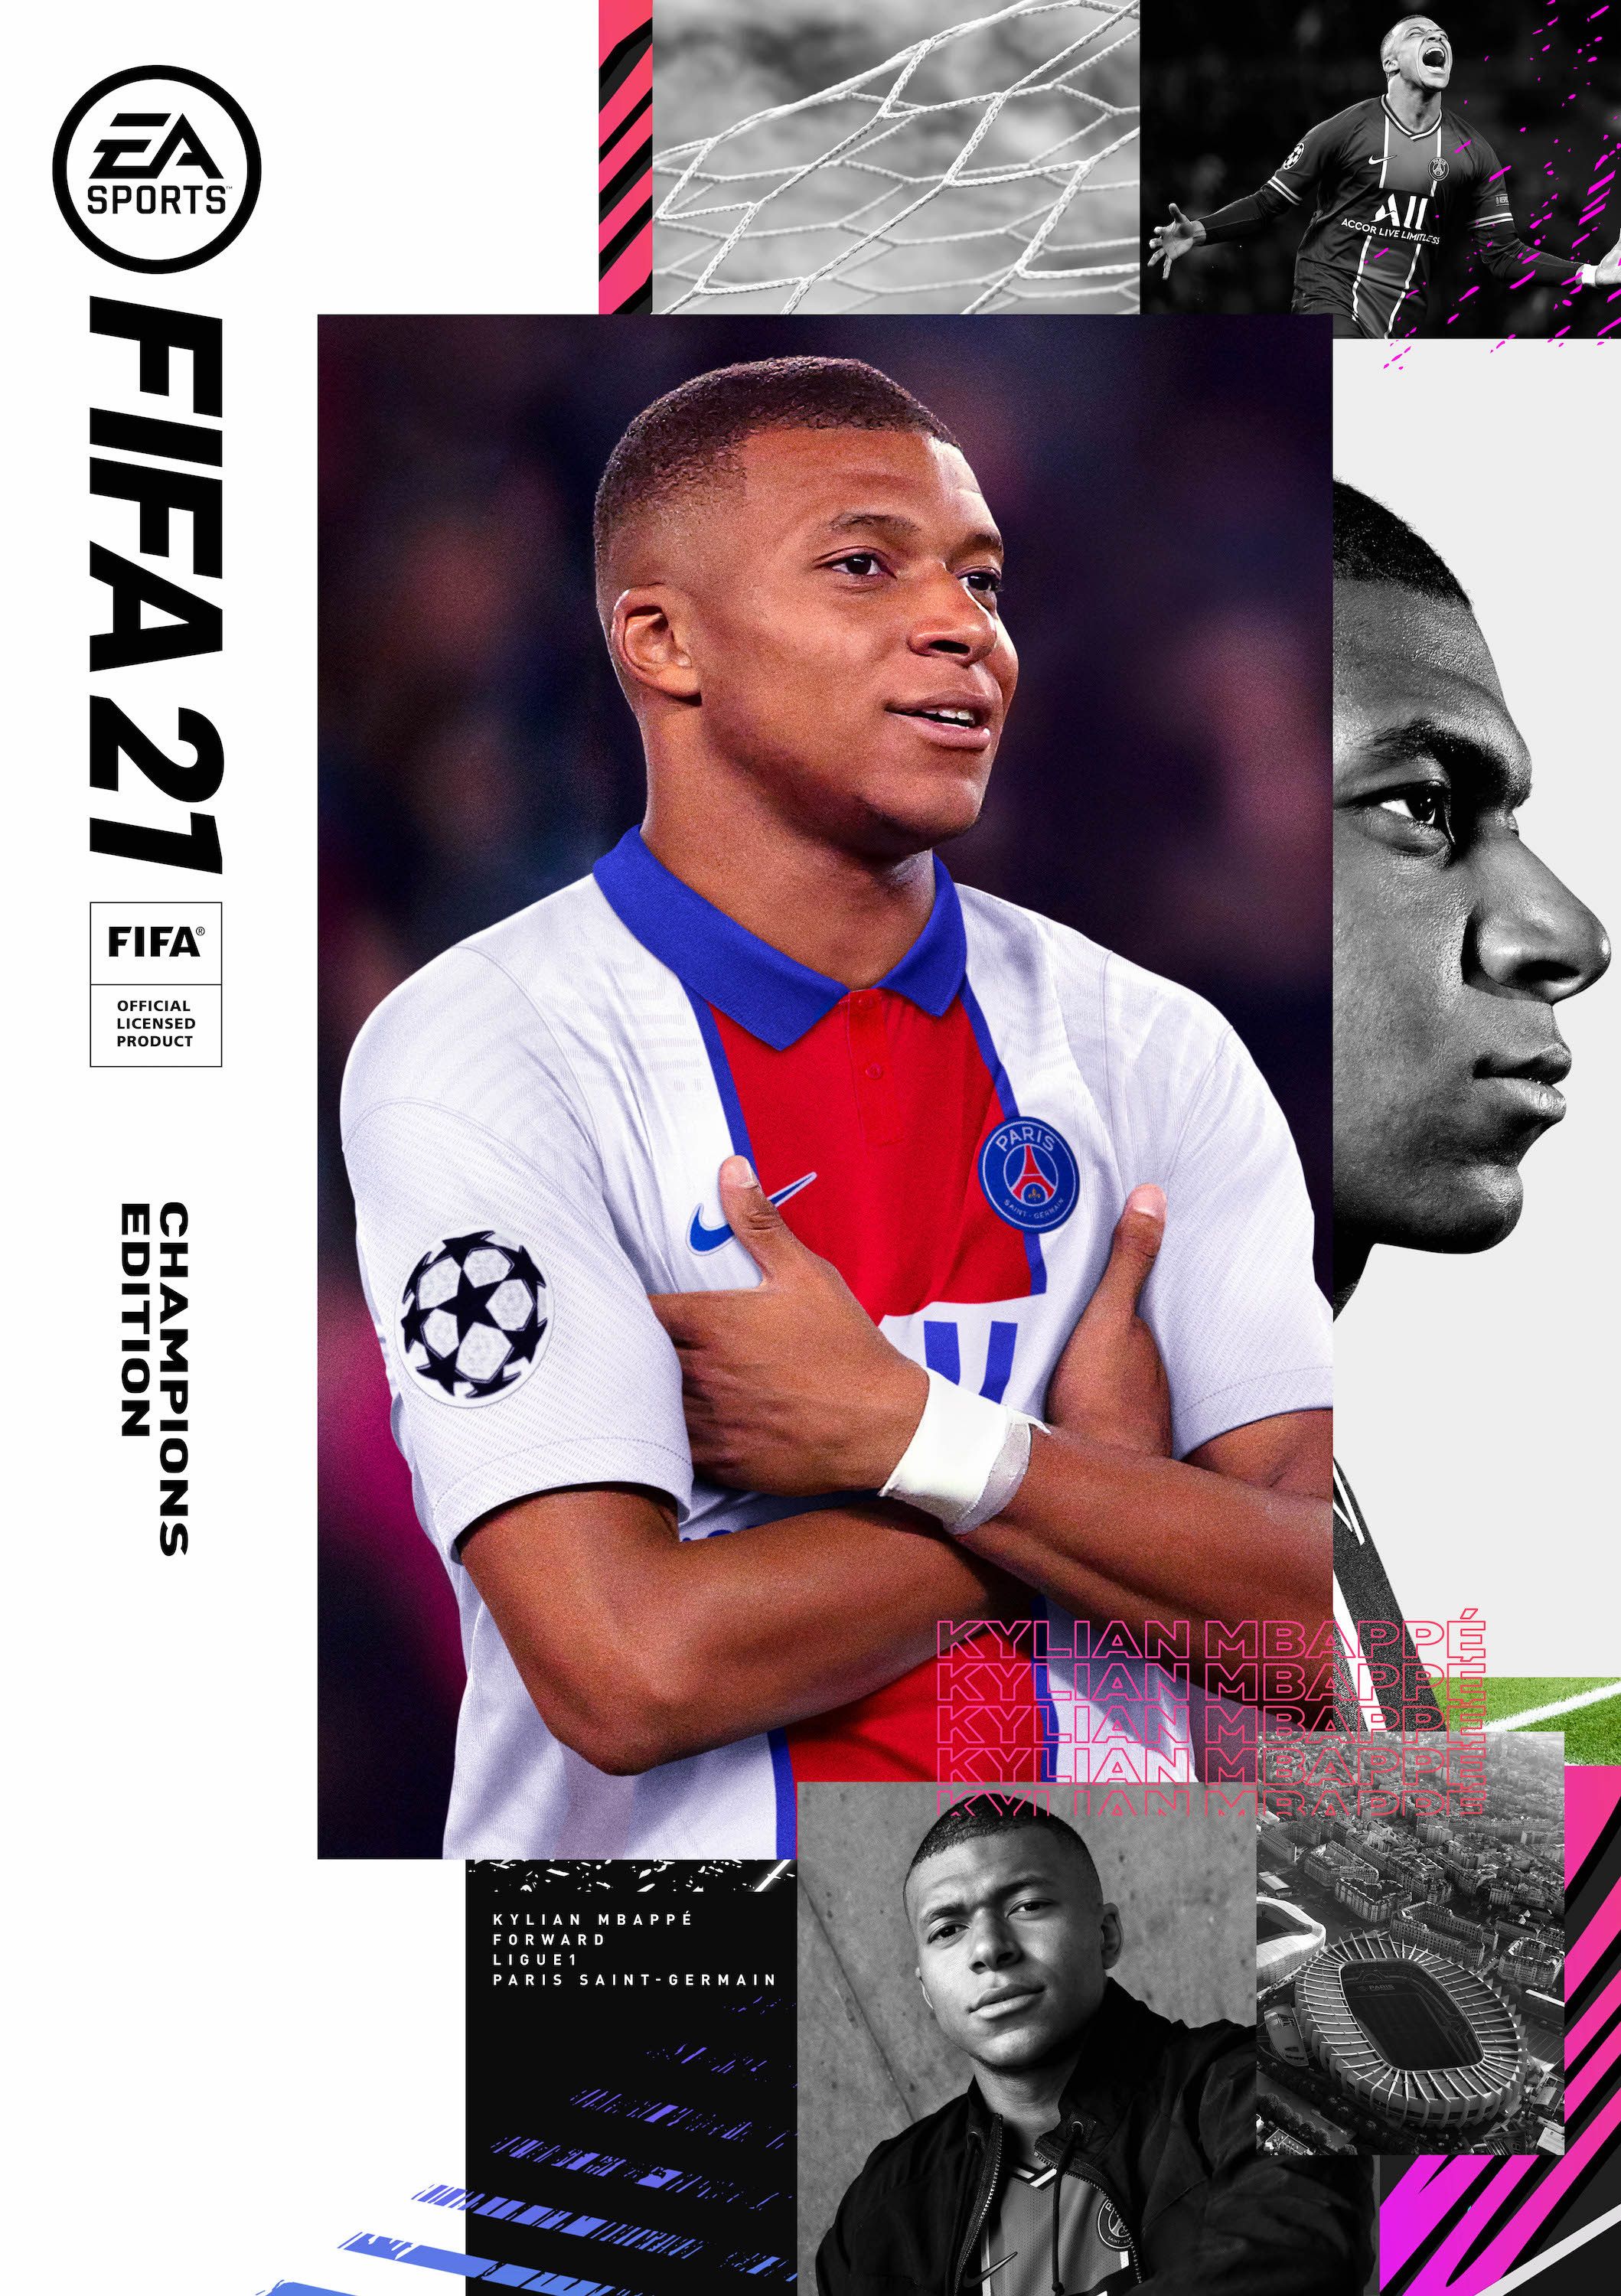 Mbappè is the cover star of FIFA 21